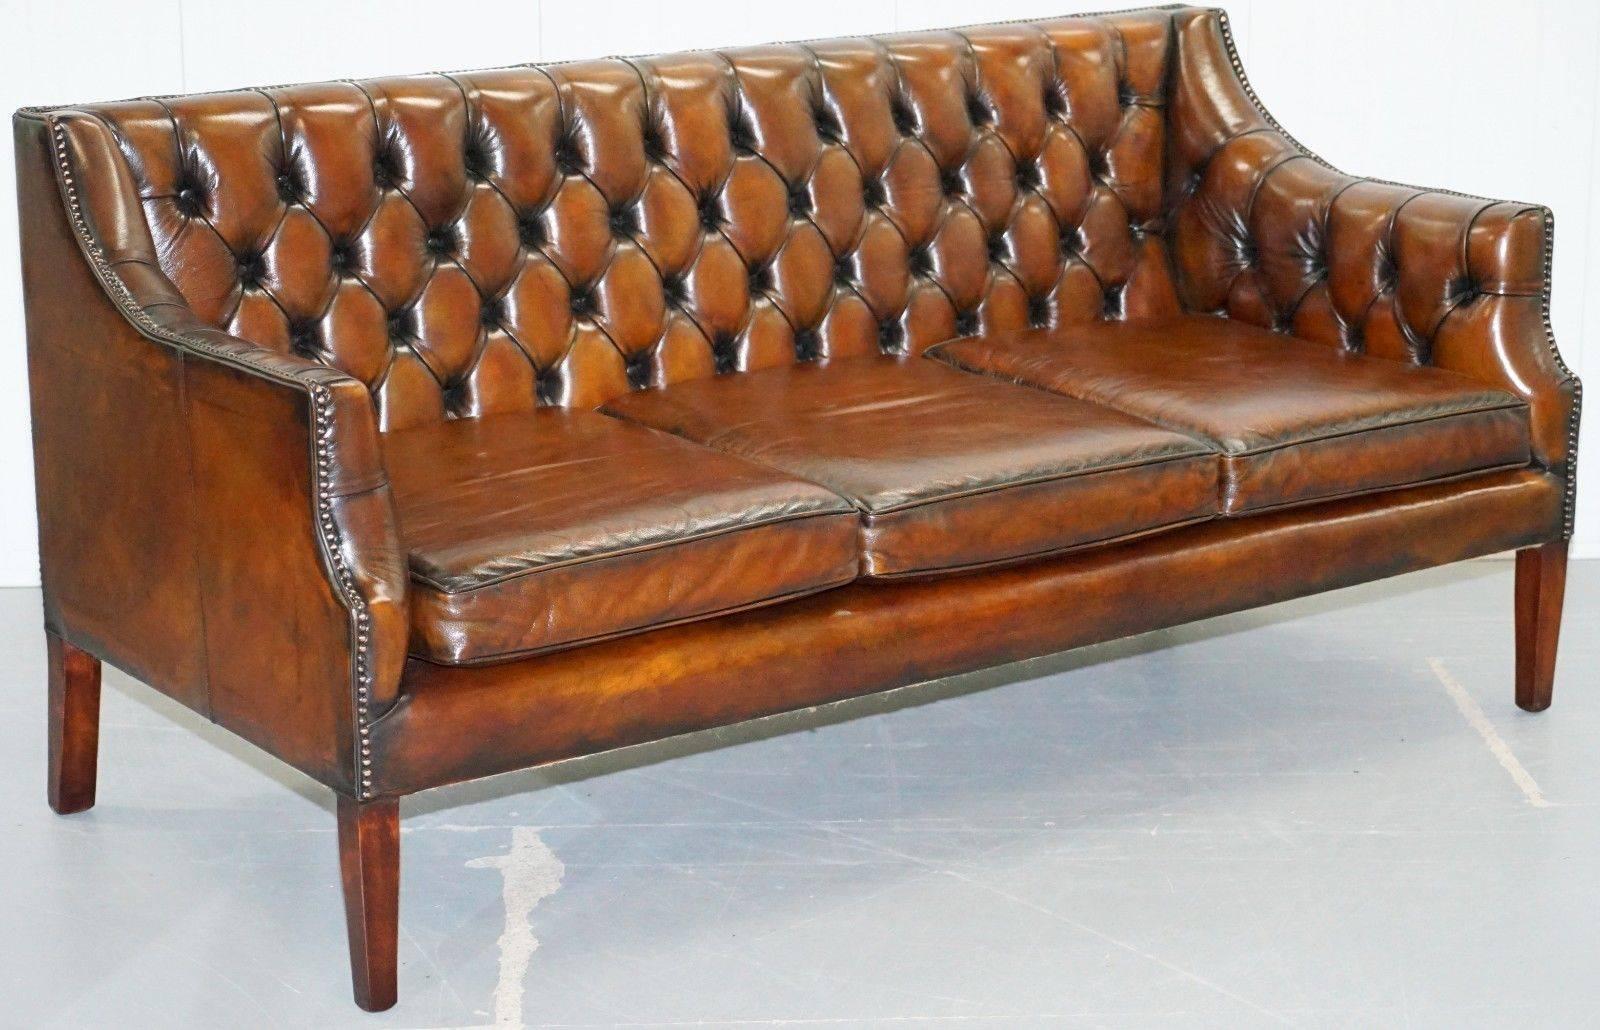 We are delighted to offer for sale this pair of new George Smith Georgian chair model aged whiskey brown leather armchairs RRP £13,800

These were custom-made to order with button backs, flat foam cushions and no castors, they can have castors